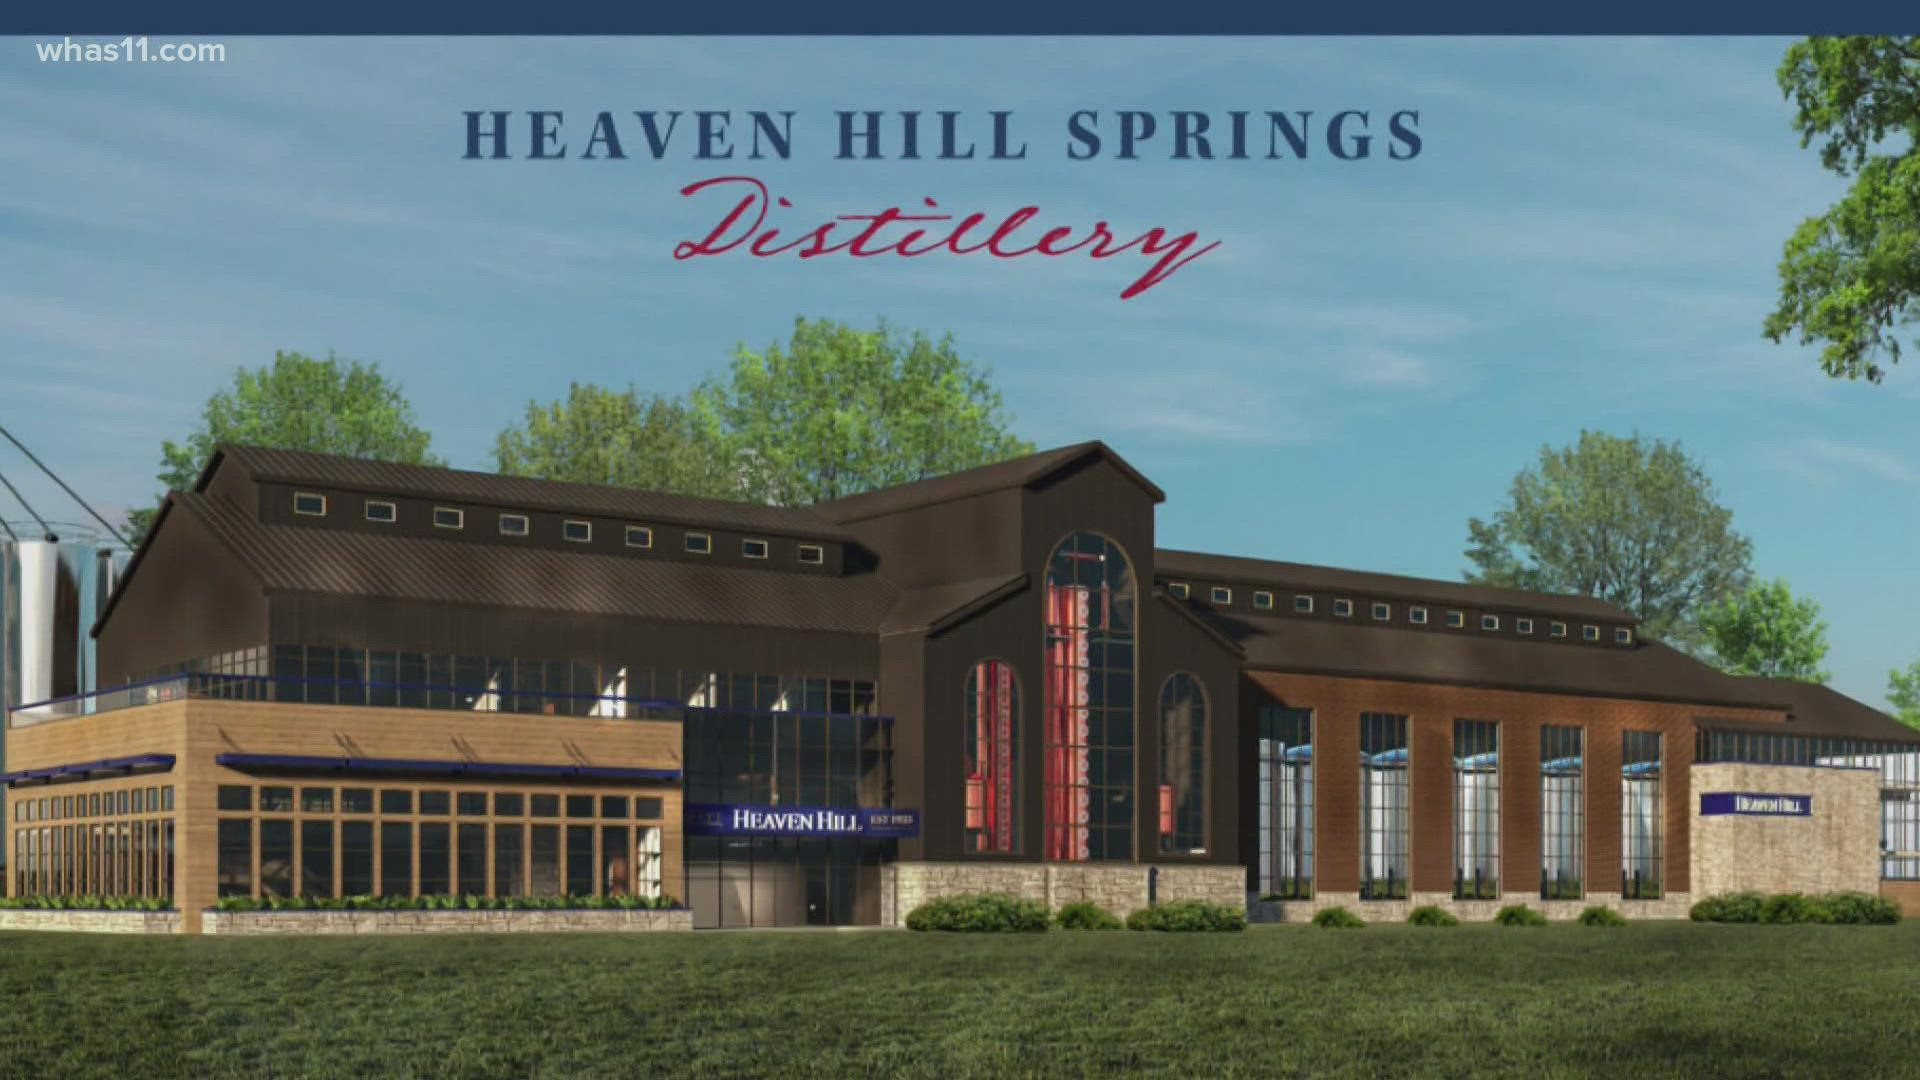 More than 25 years after a devastating fire, the family-owned distillery is continuing its legacy in the community.